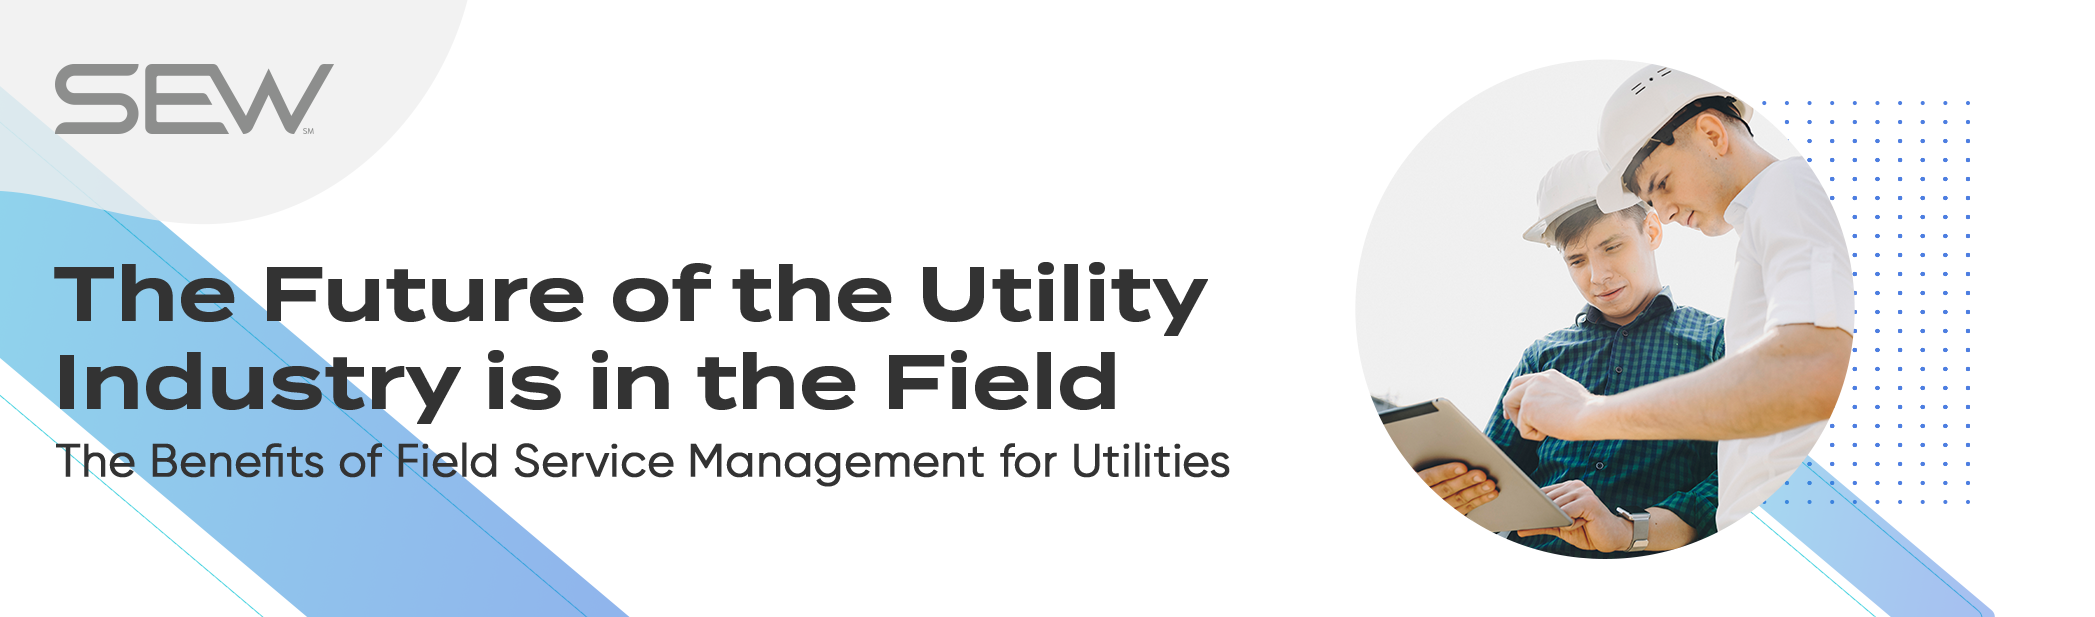 The Future of the Utility Industry is in the Field: The Benefits of Field Service Management for Utilities